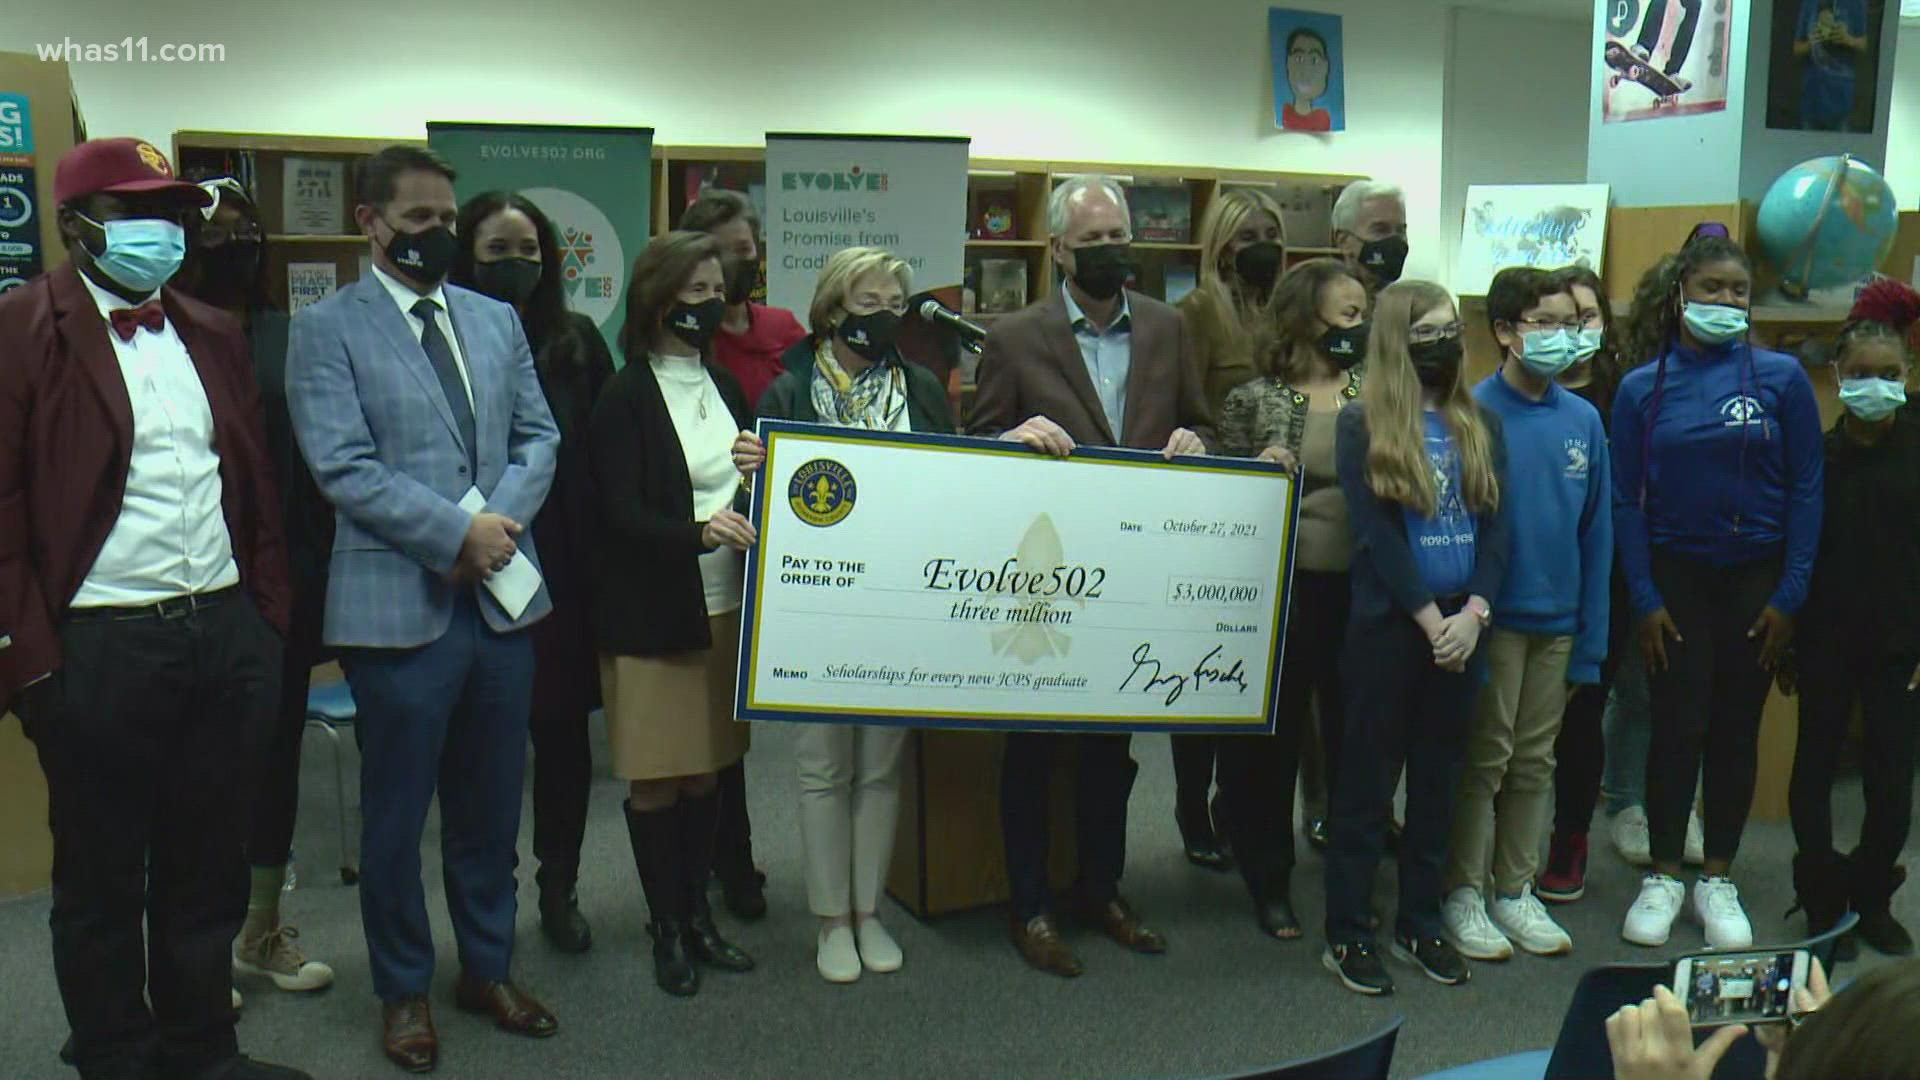 Evolve502, a scholarship that allows eligible students to begin studies tuition-free at any Kentucky Community and Technical college, secured a $20 million donation.